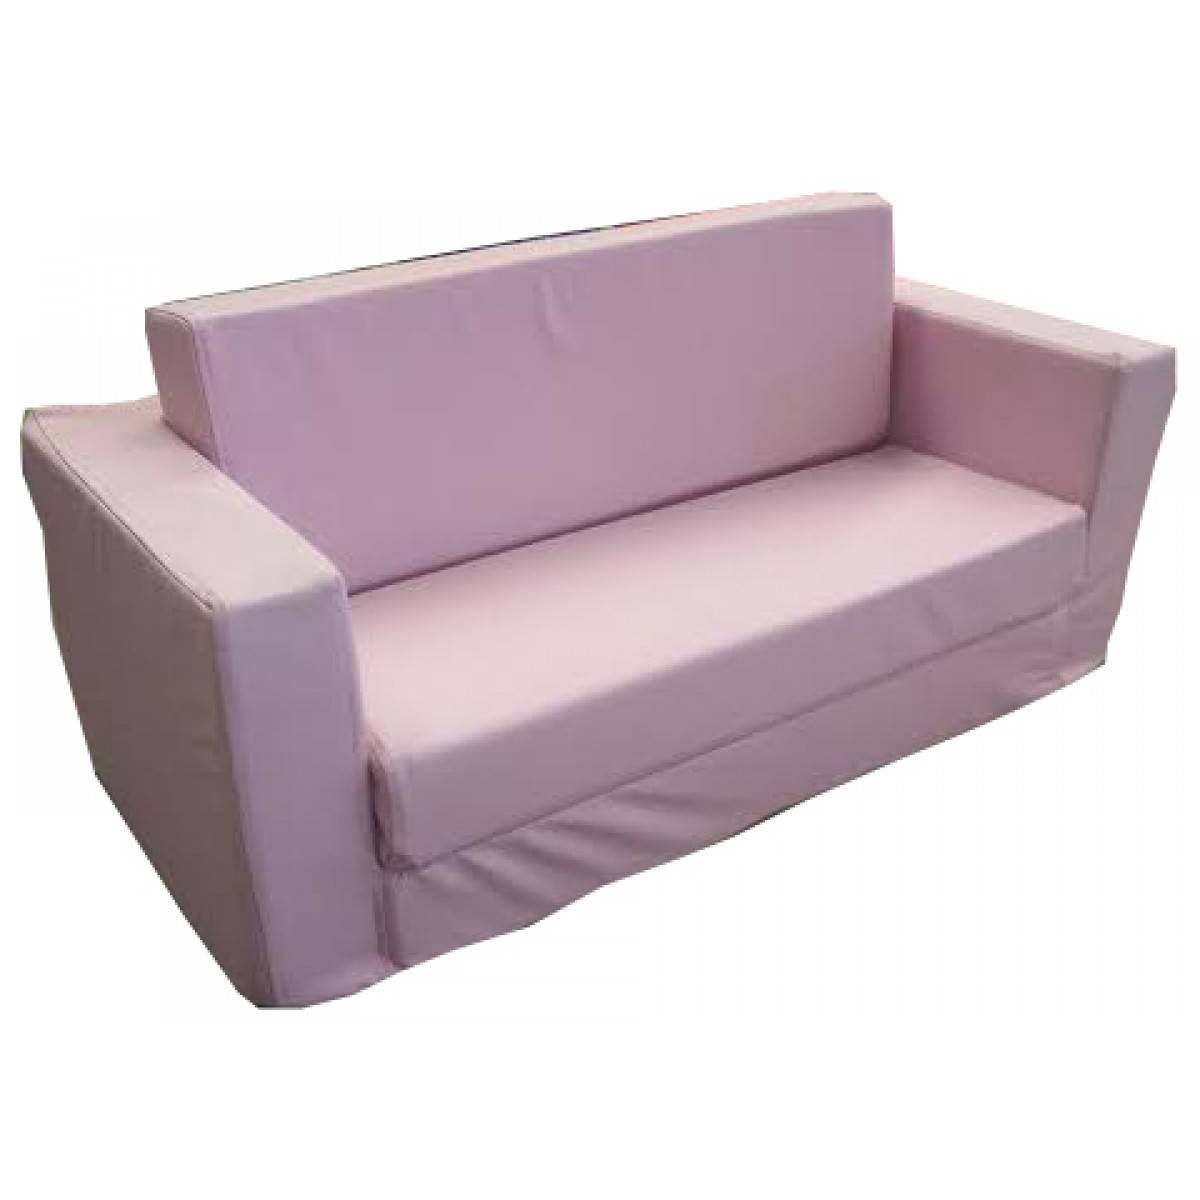 Kids Fold Out Sofa – Gallery Image Seniorhomes With Flip Out Sofa For Kids (View 29 of 30)